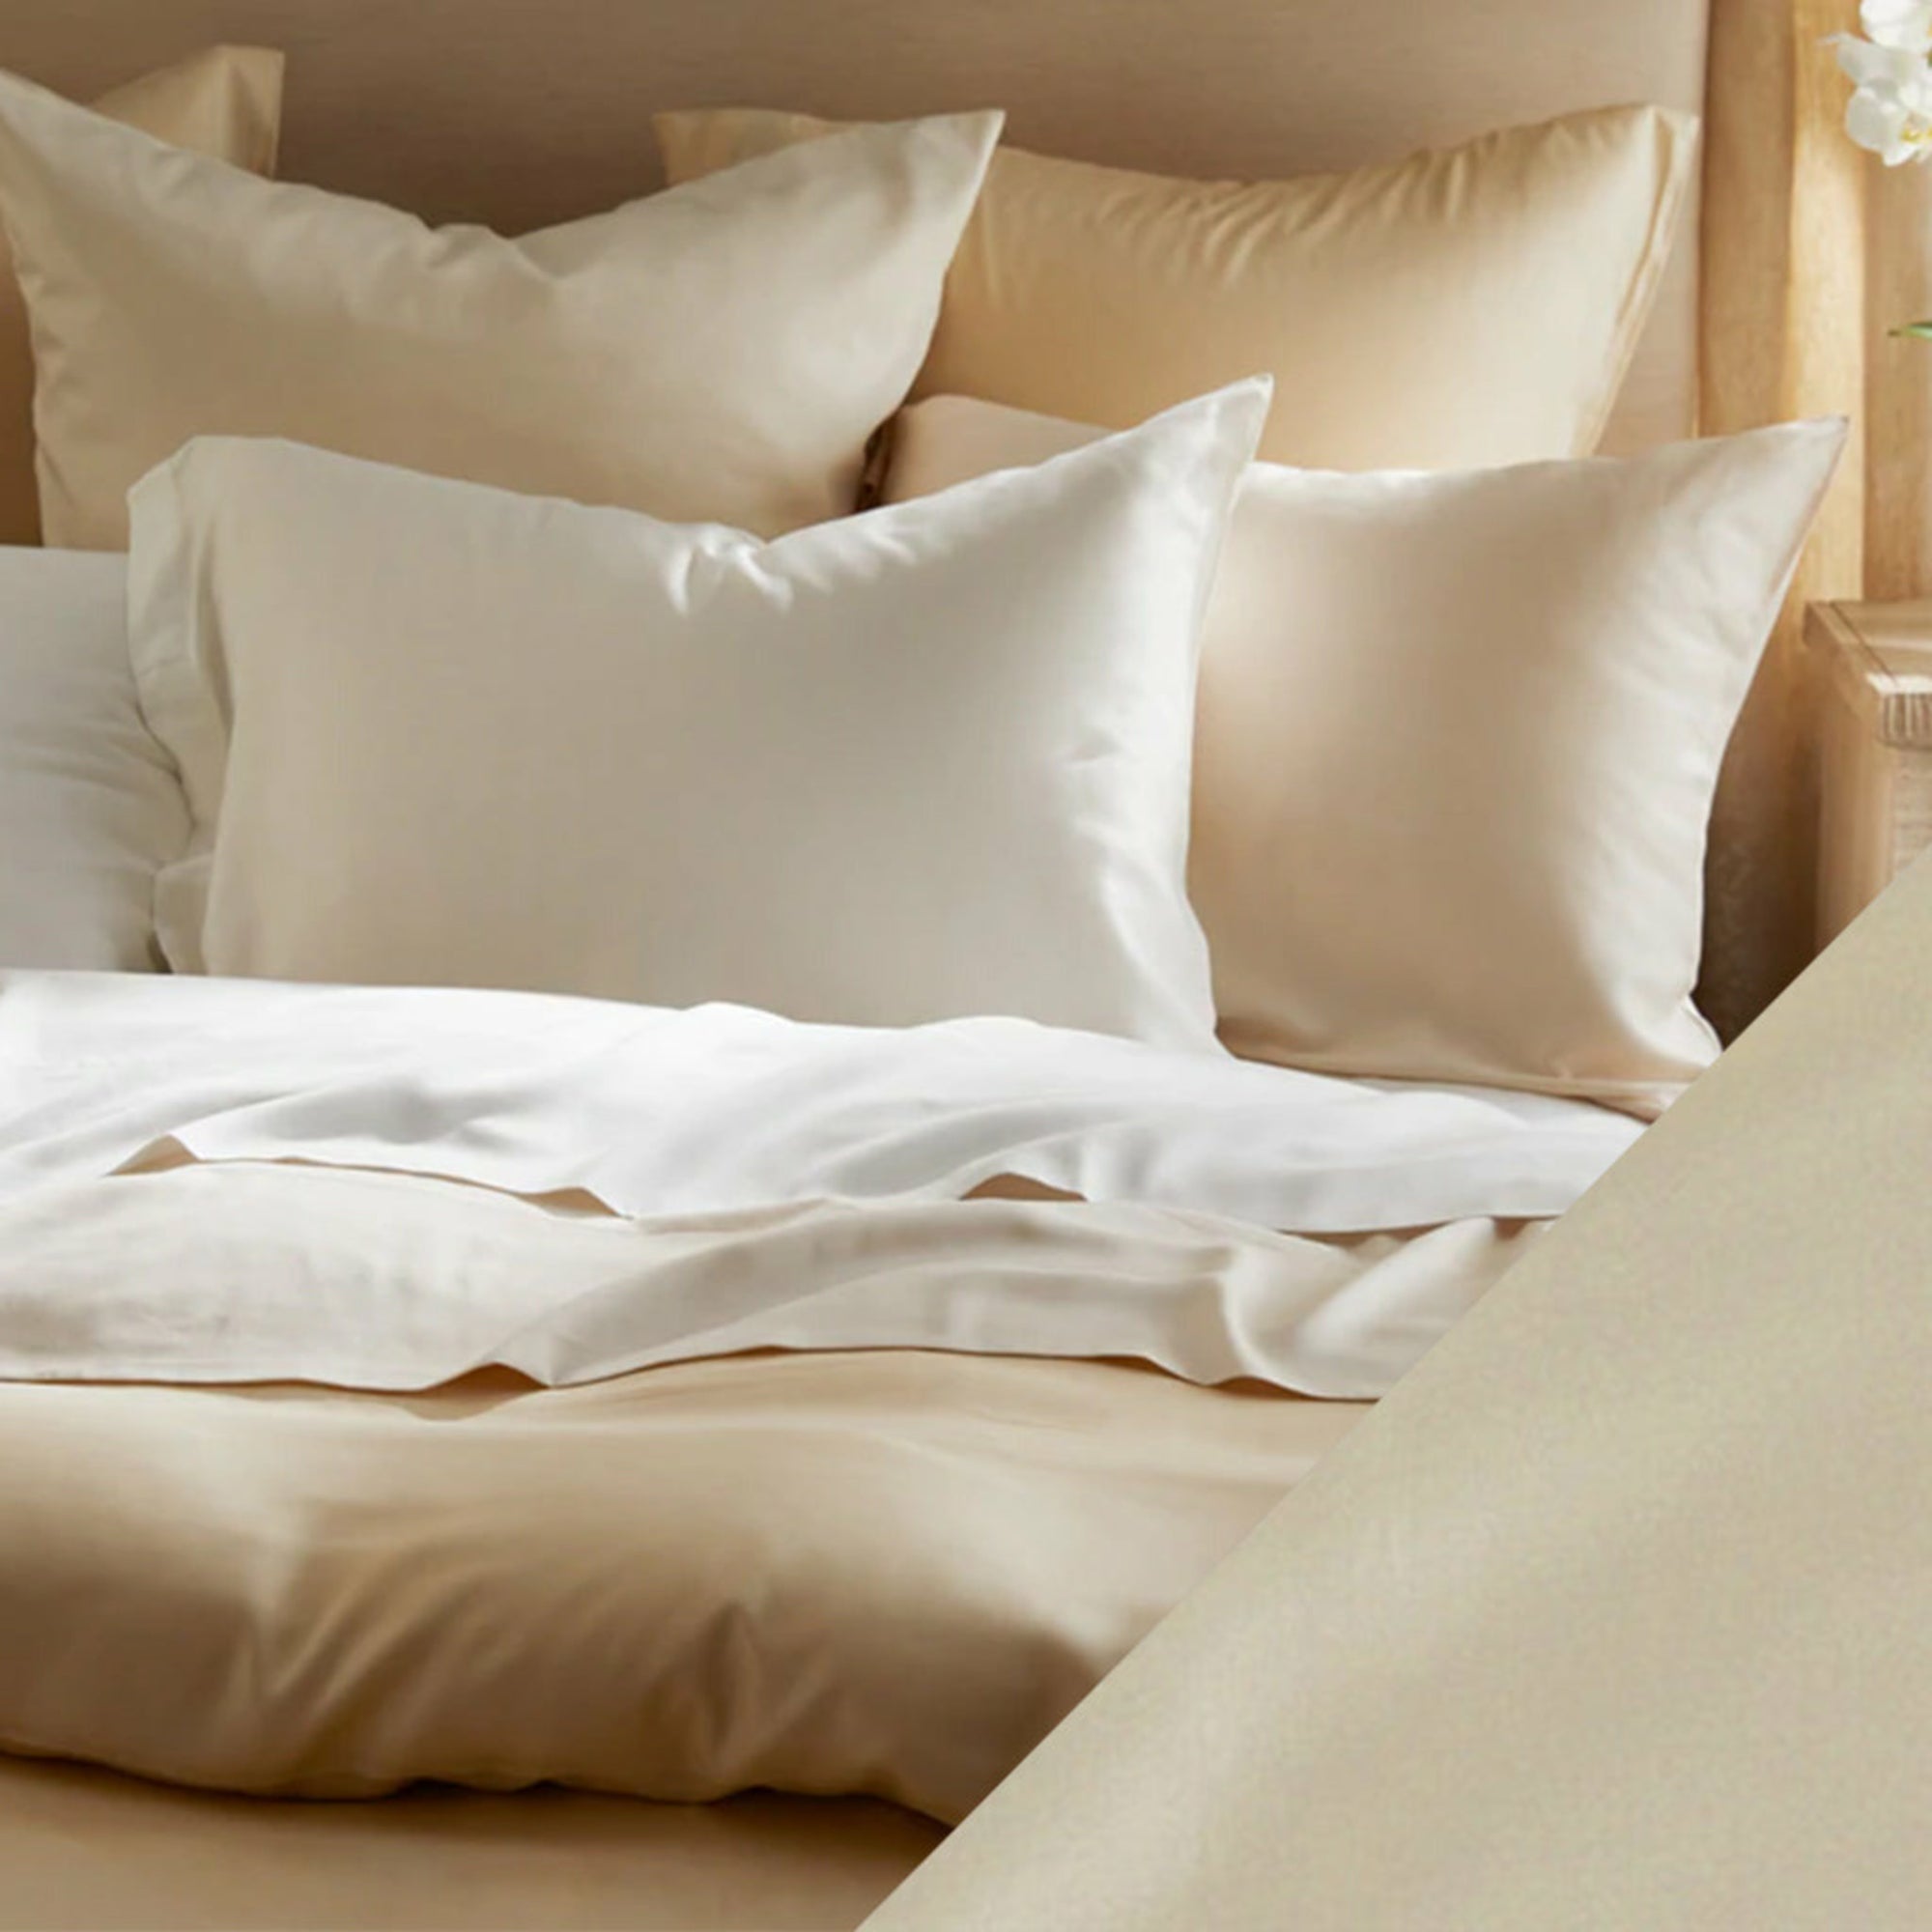 Main Lifestyle of SDH Legna Classic Bedding with Swatch of Parchment